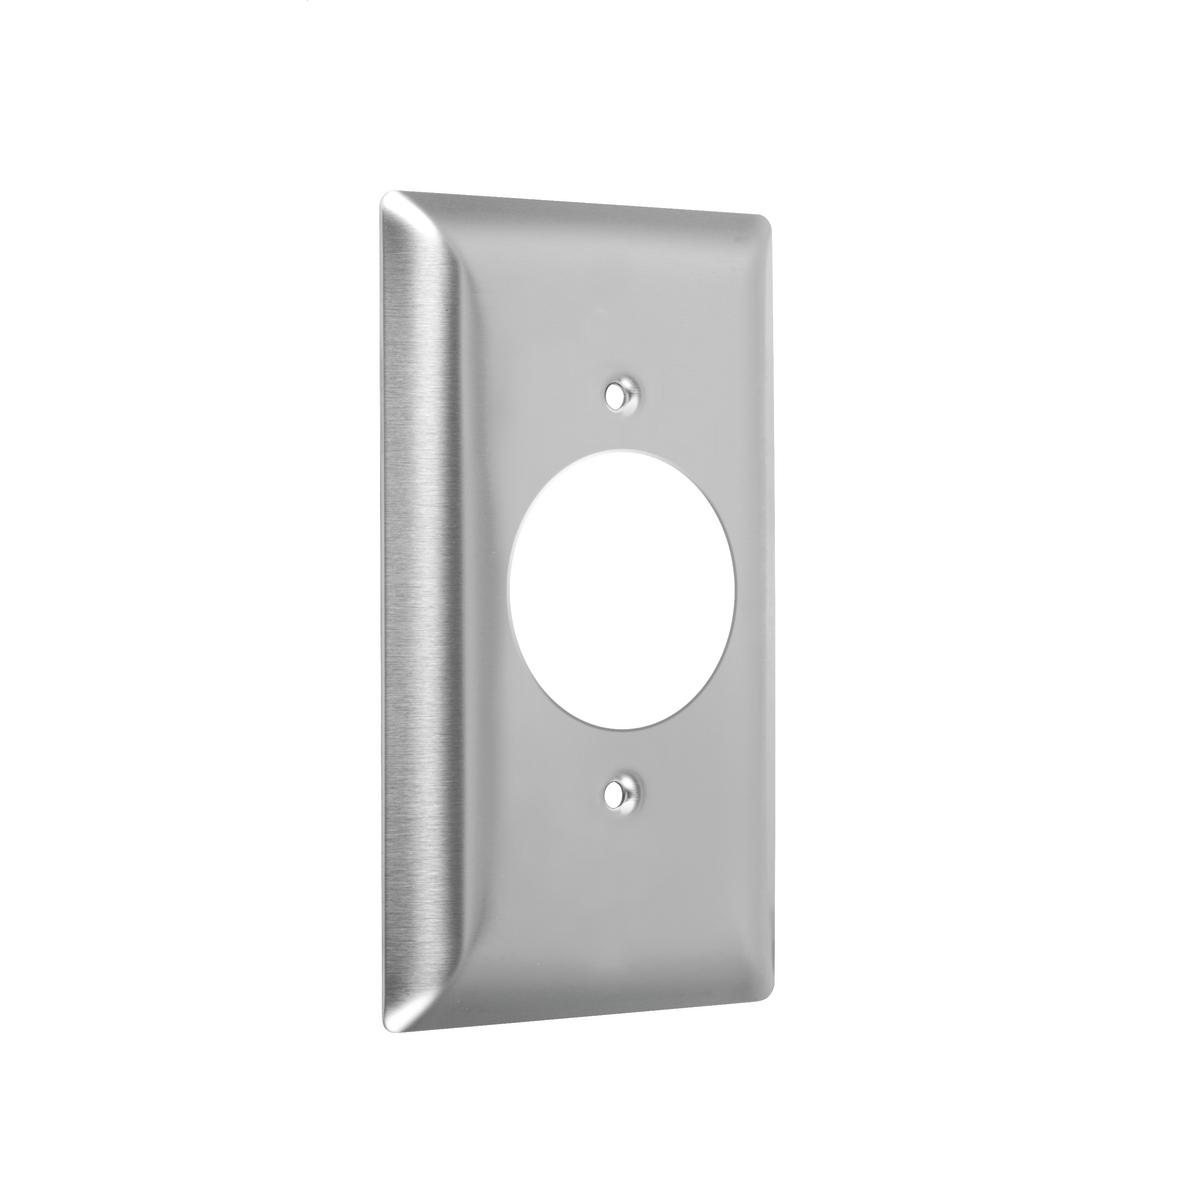 Hubbell WSS-SR1 1-Gang Metal Wallplate, Standard, Single Receptacle 1.60 in., Stainless Steel  ; Easily primed and painted to match or complement walls. ; Won't bow, crack or distort during installation. ; Premium North American powder coat. ; Includes screw(s) in matchi